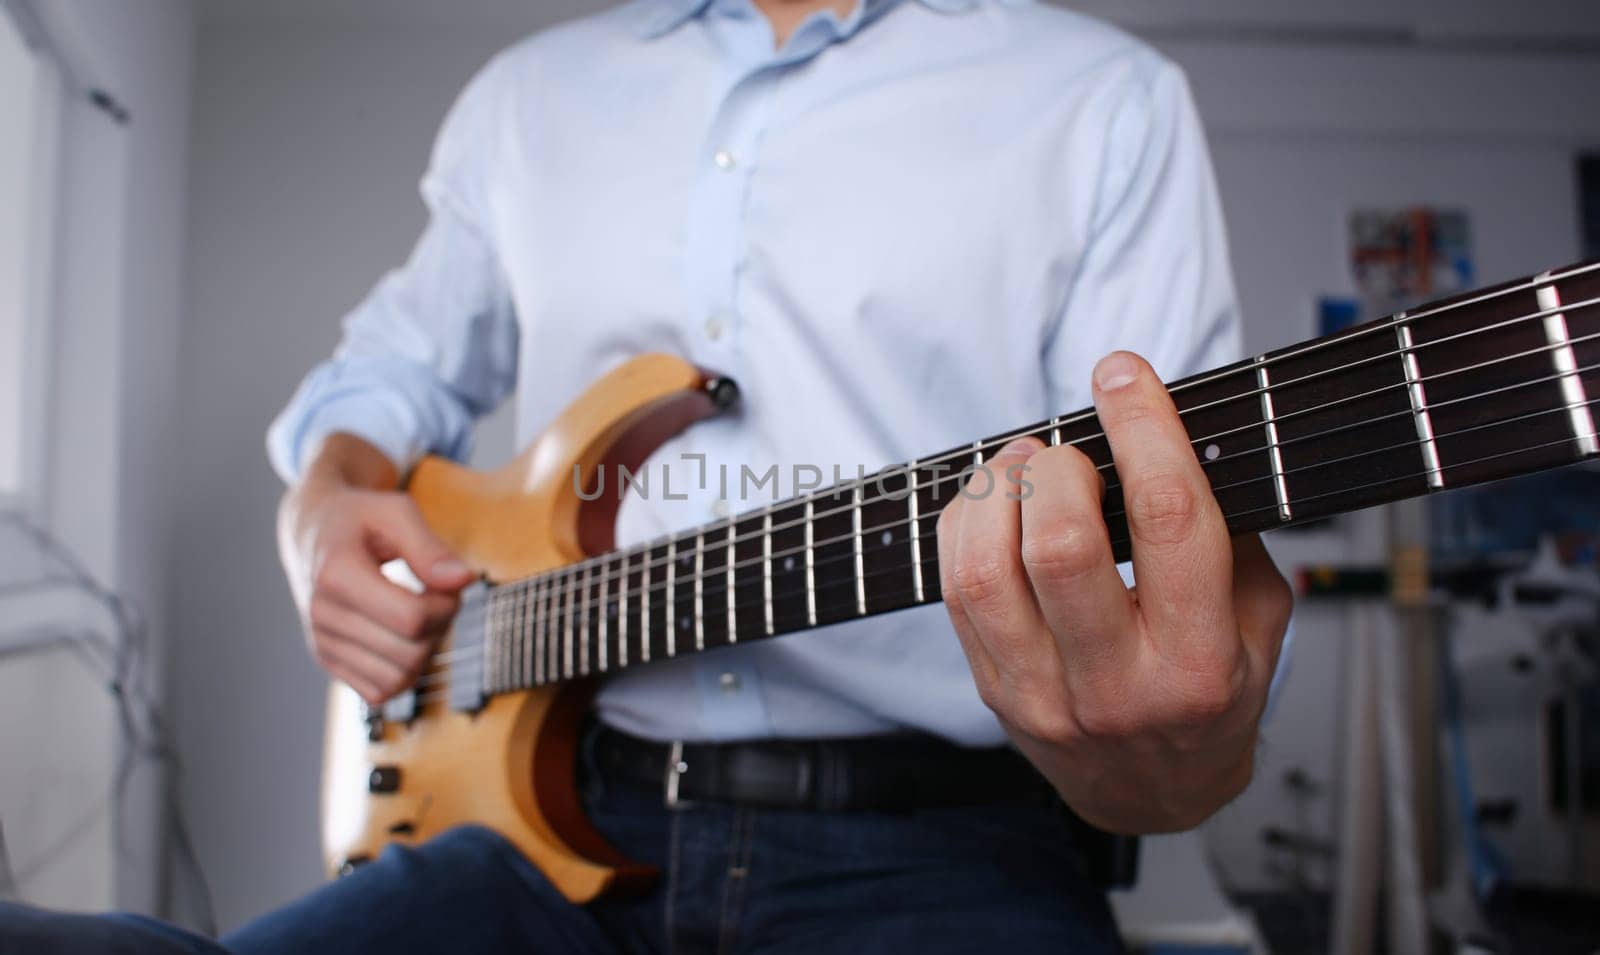 Male arms holding and playing classic shape wooden electric guitar closeup. Six stringed learning musical school education art leisure electrical vintage stage shop having fun enjoying hobby concept